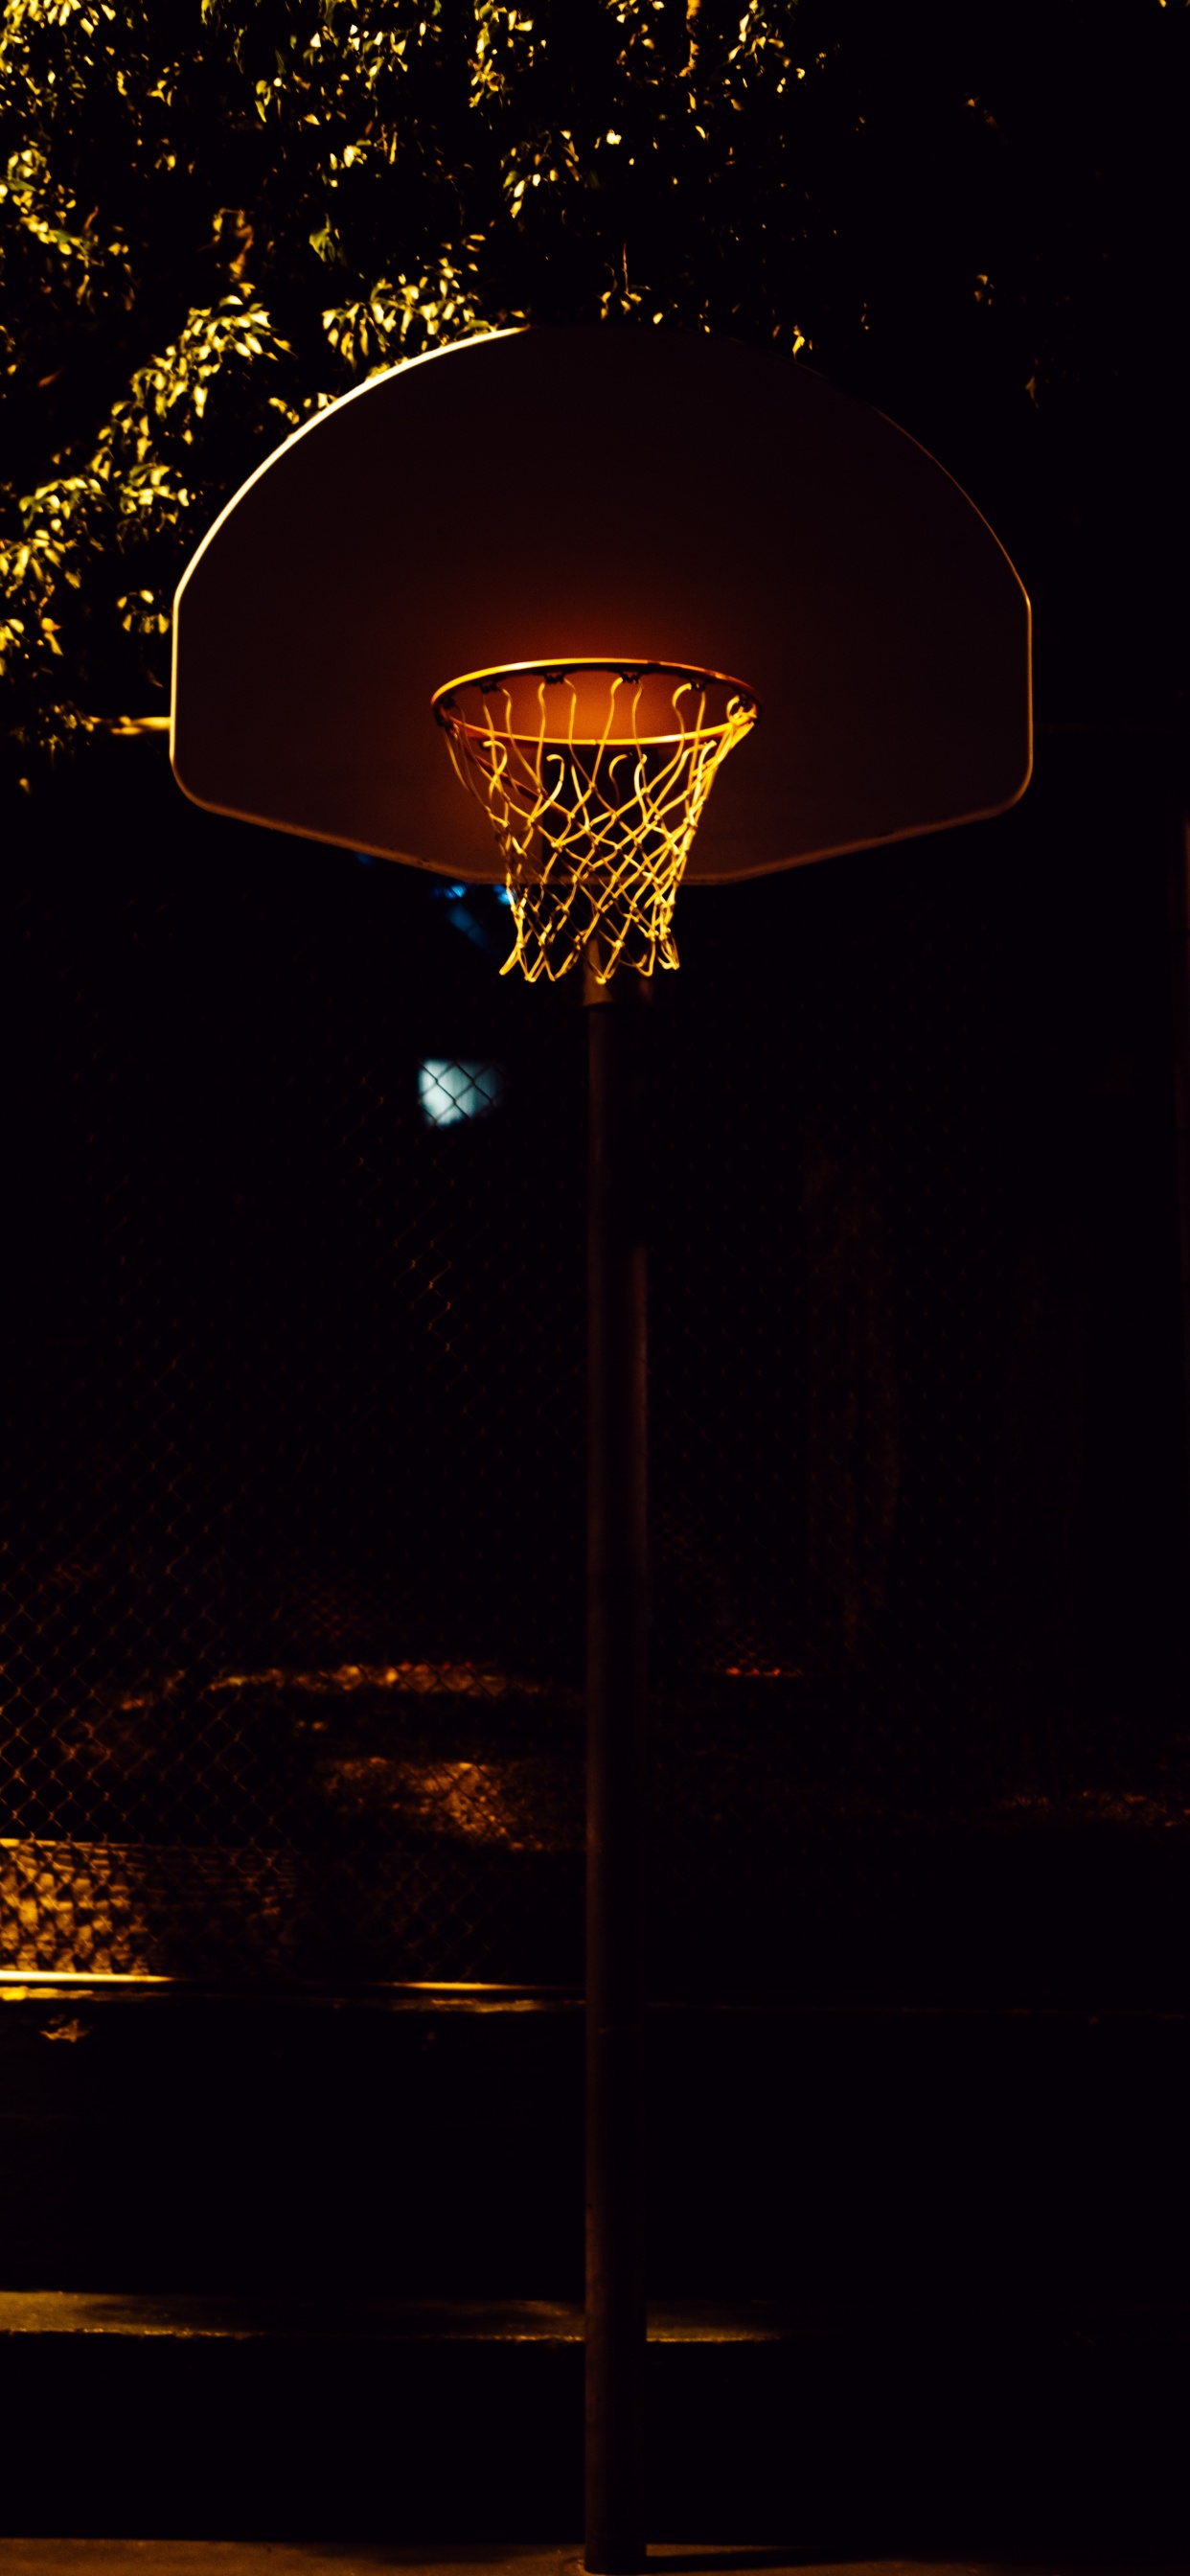 Basketball Hoop With Light Turned on During Night Time. Wallpaper in 1242x2688 Resolution